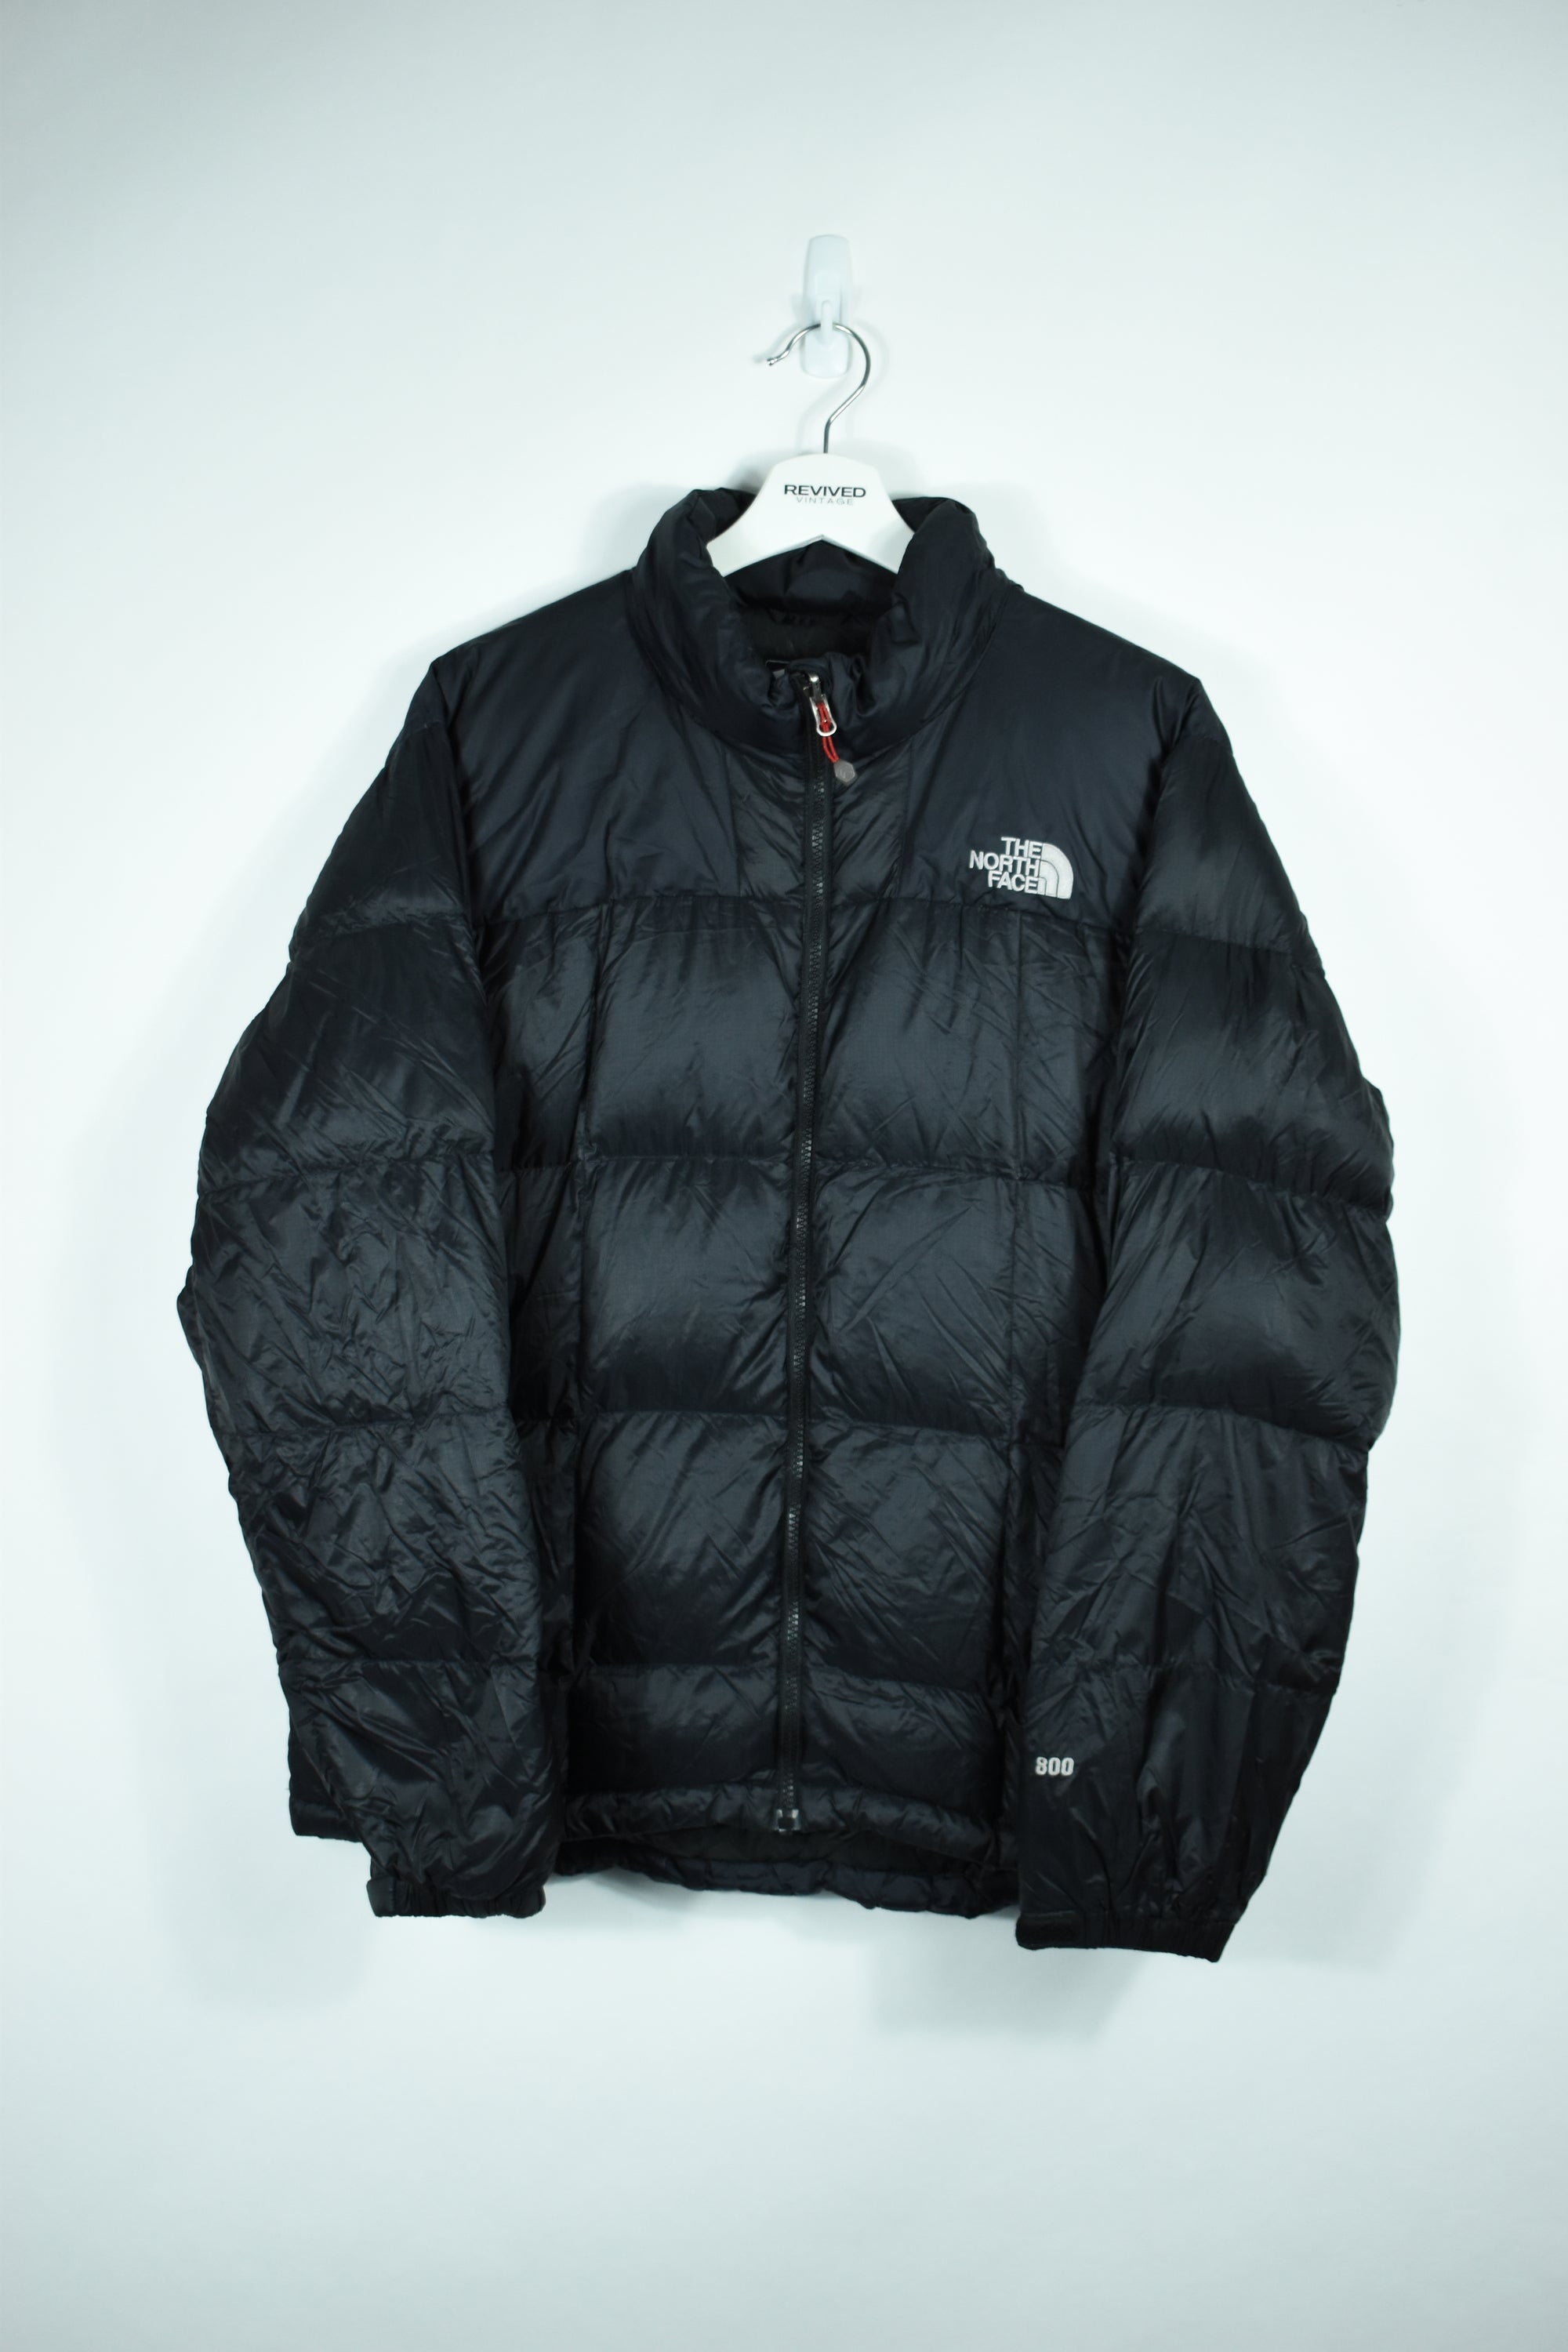 Vintage North Face Black Puffer 800 Sumit Series LARGE